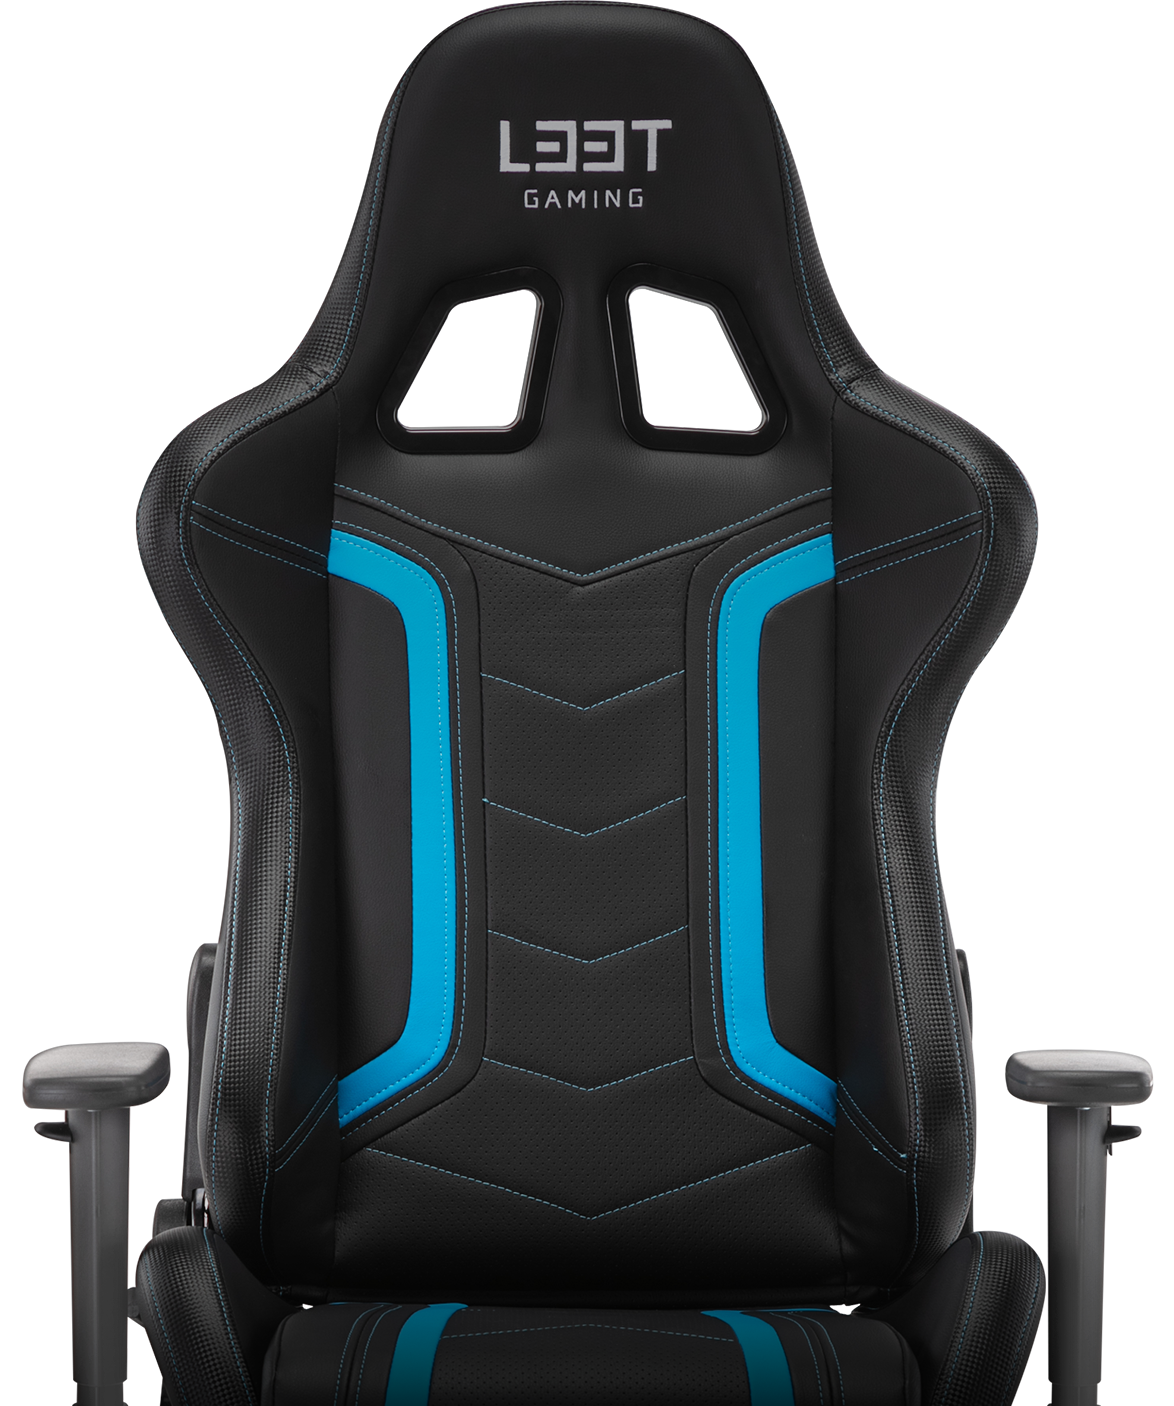 L33T Energy Gaming Chairs - L33T-Gaming.com